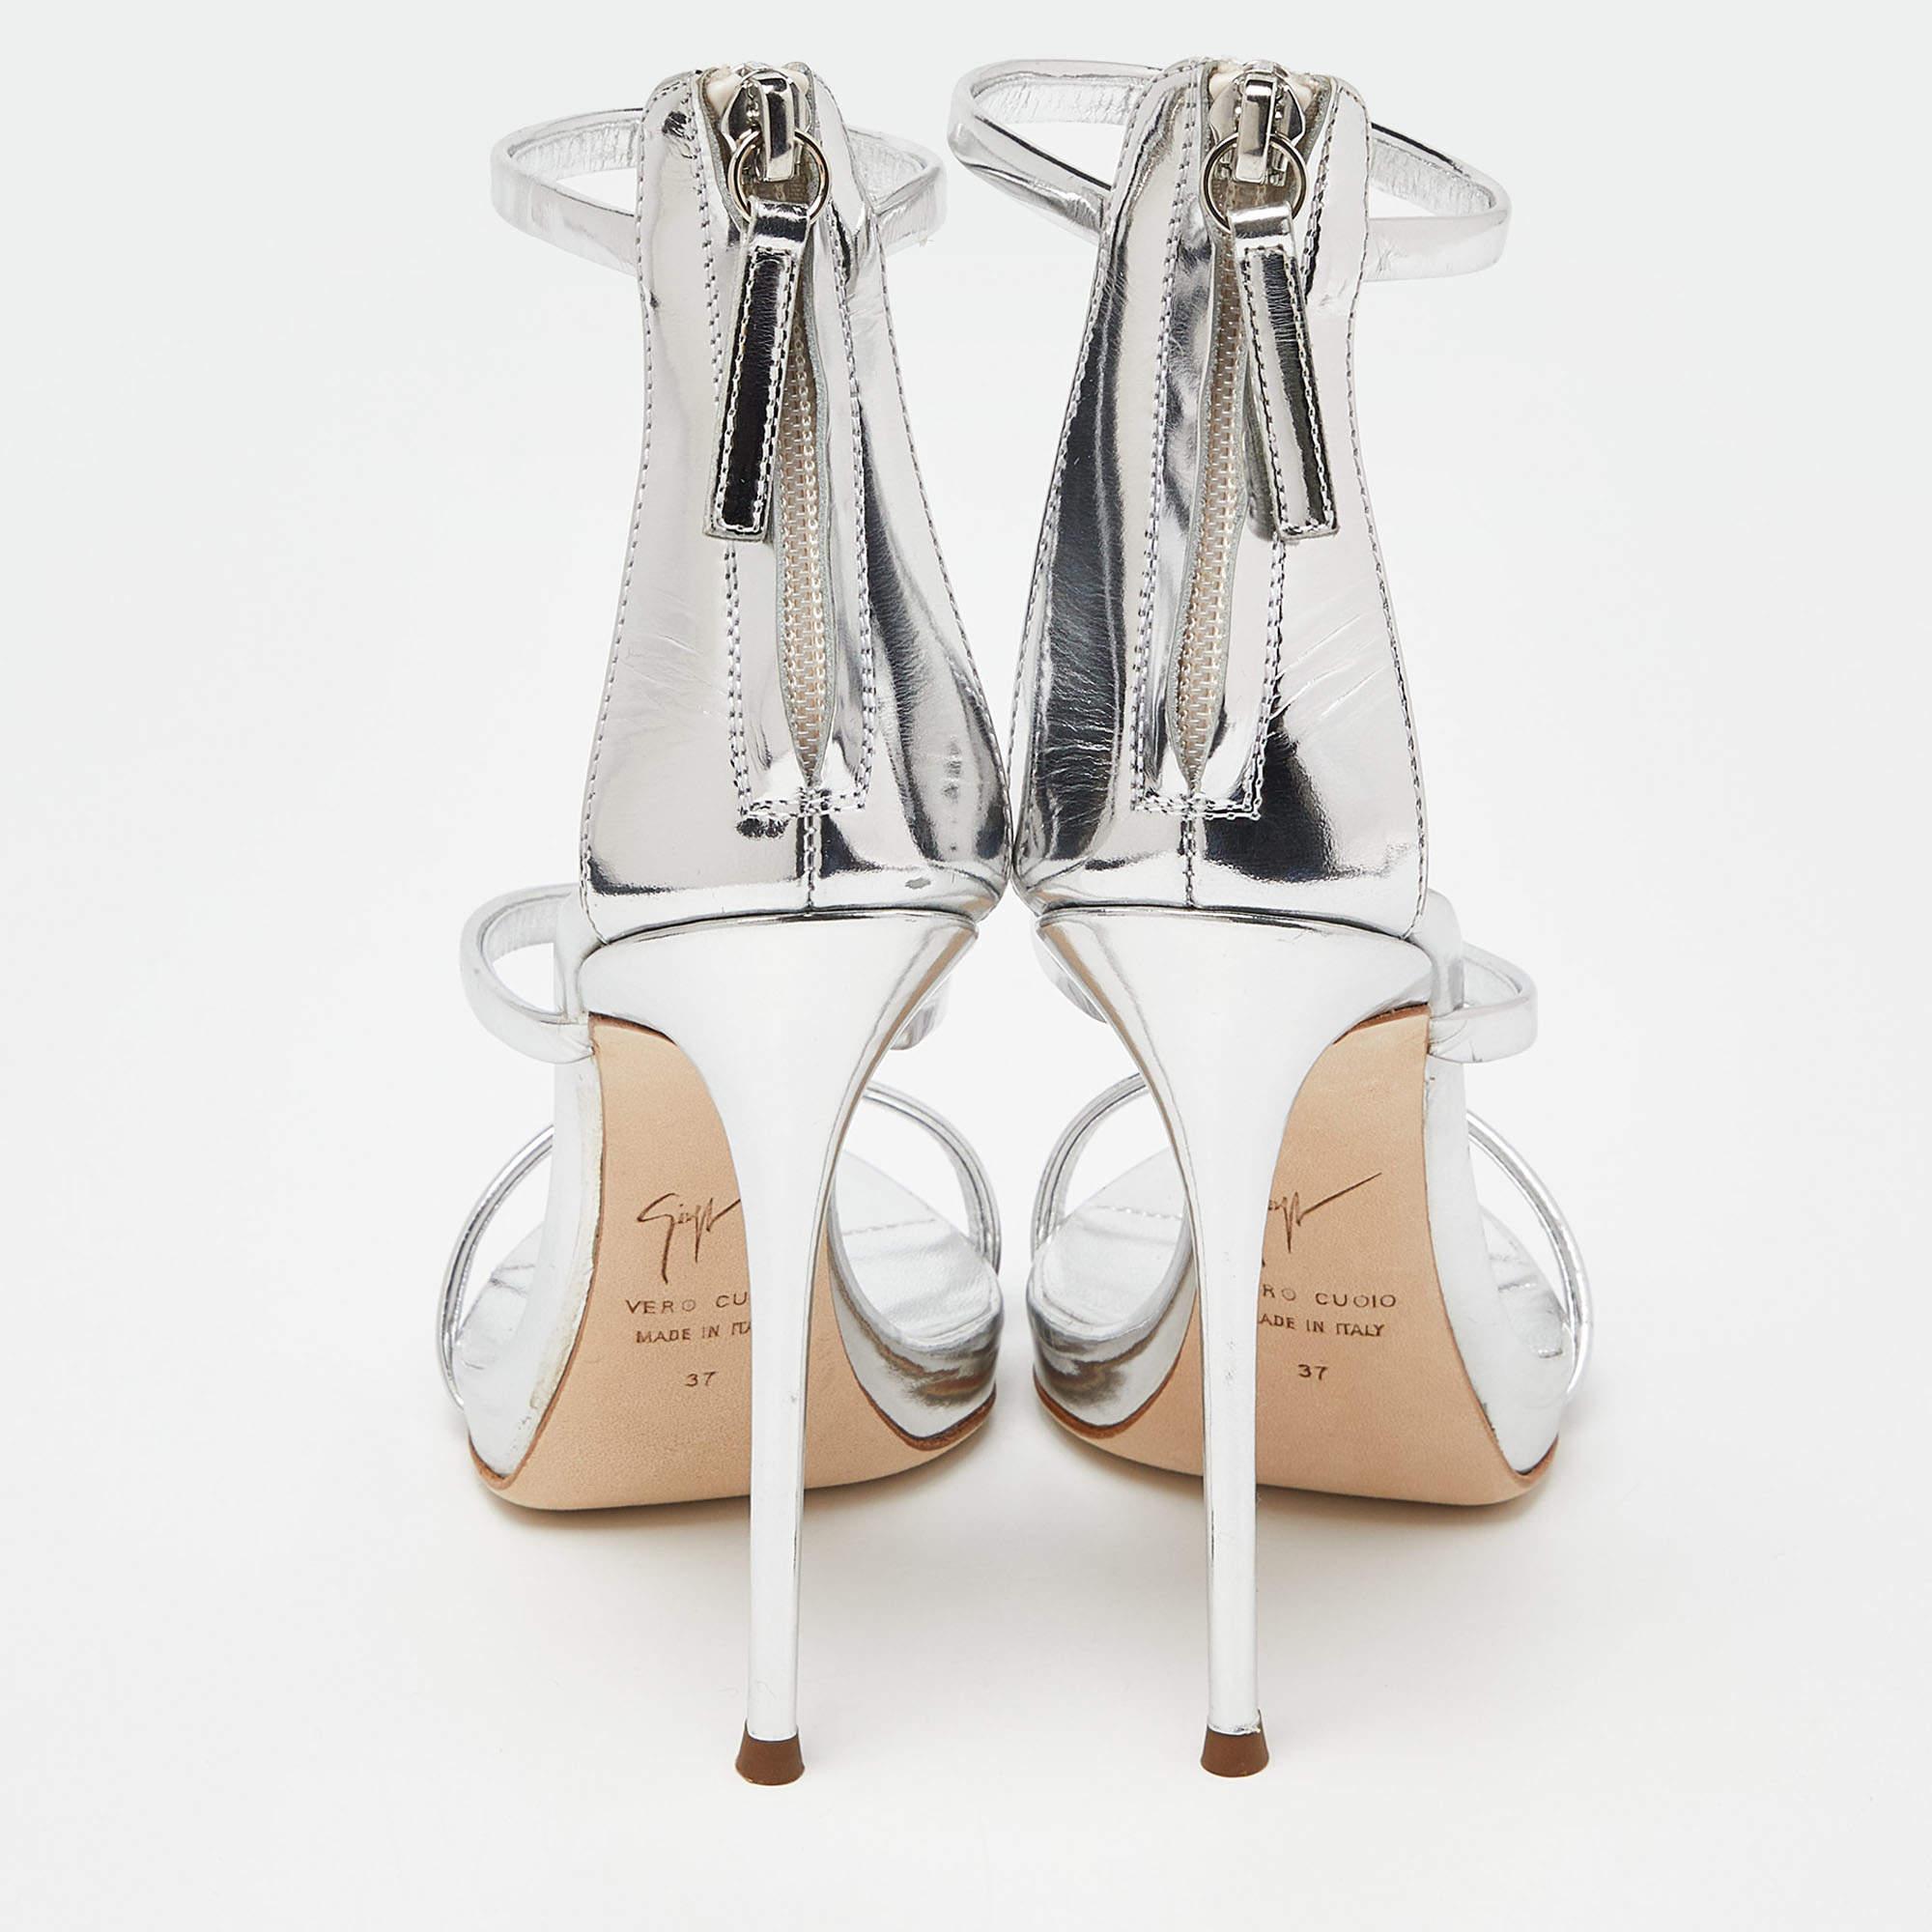 Giuseppe Zanotti Silver Patent Leather Harmony Sandals Size 37 For Sale 4